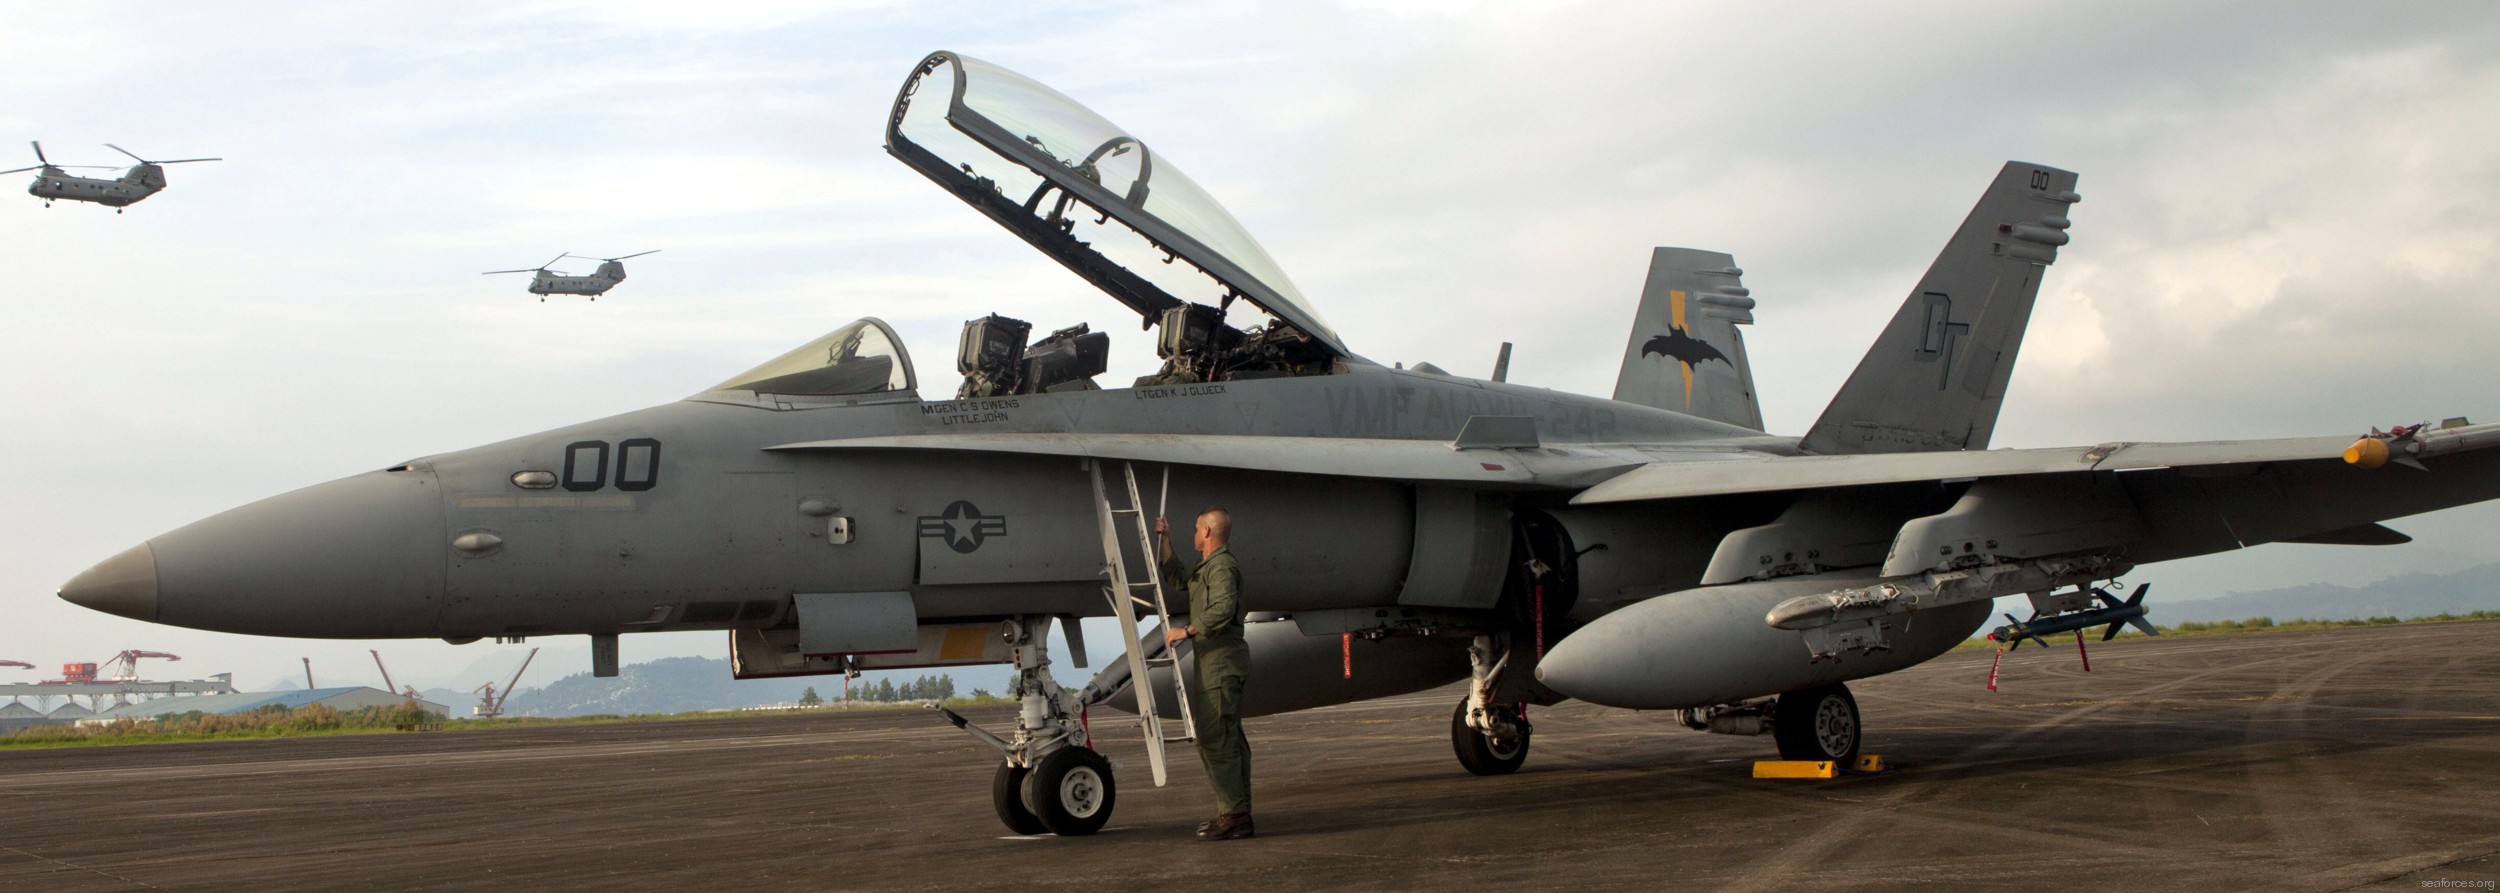 vmfa(aw)-242 bats marine all-weather fighter attack squadron usmc f/a-18d hornet 02 subic bay philippines phiblex